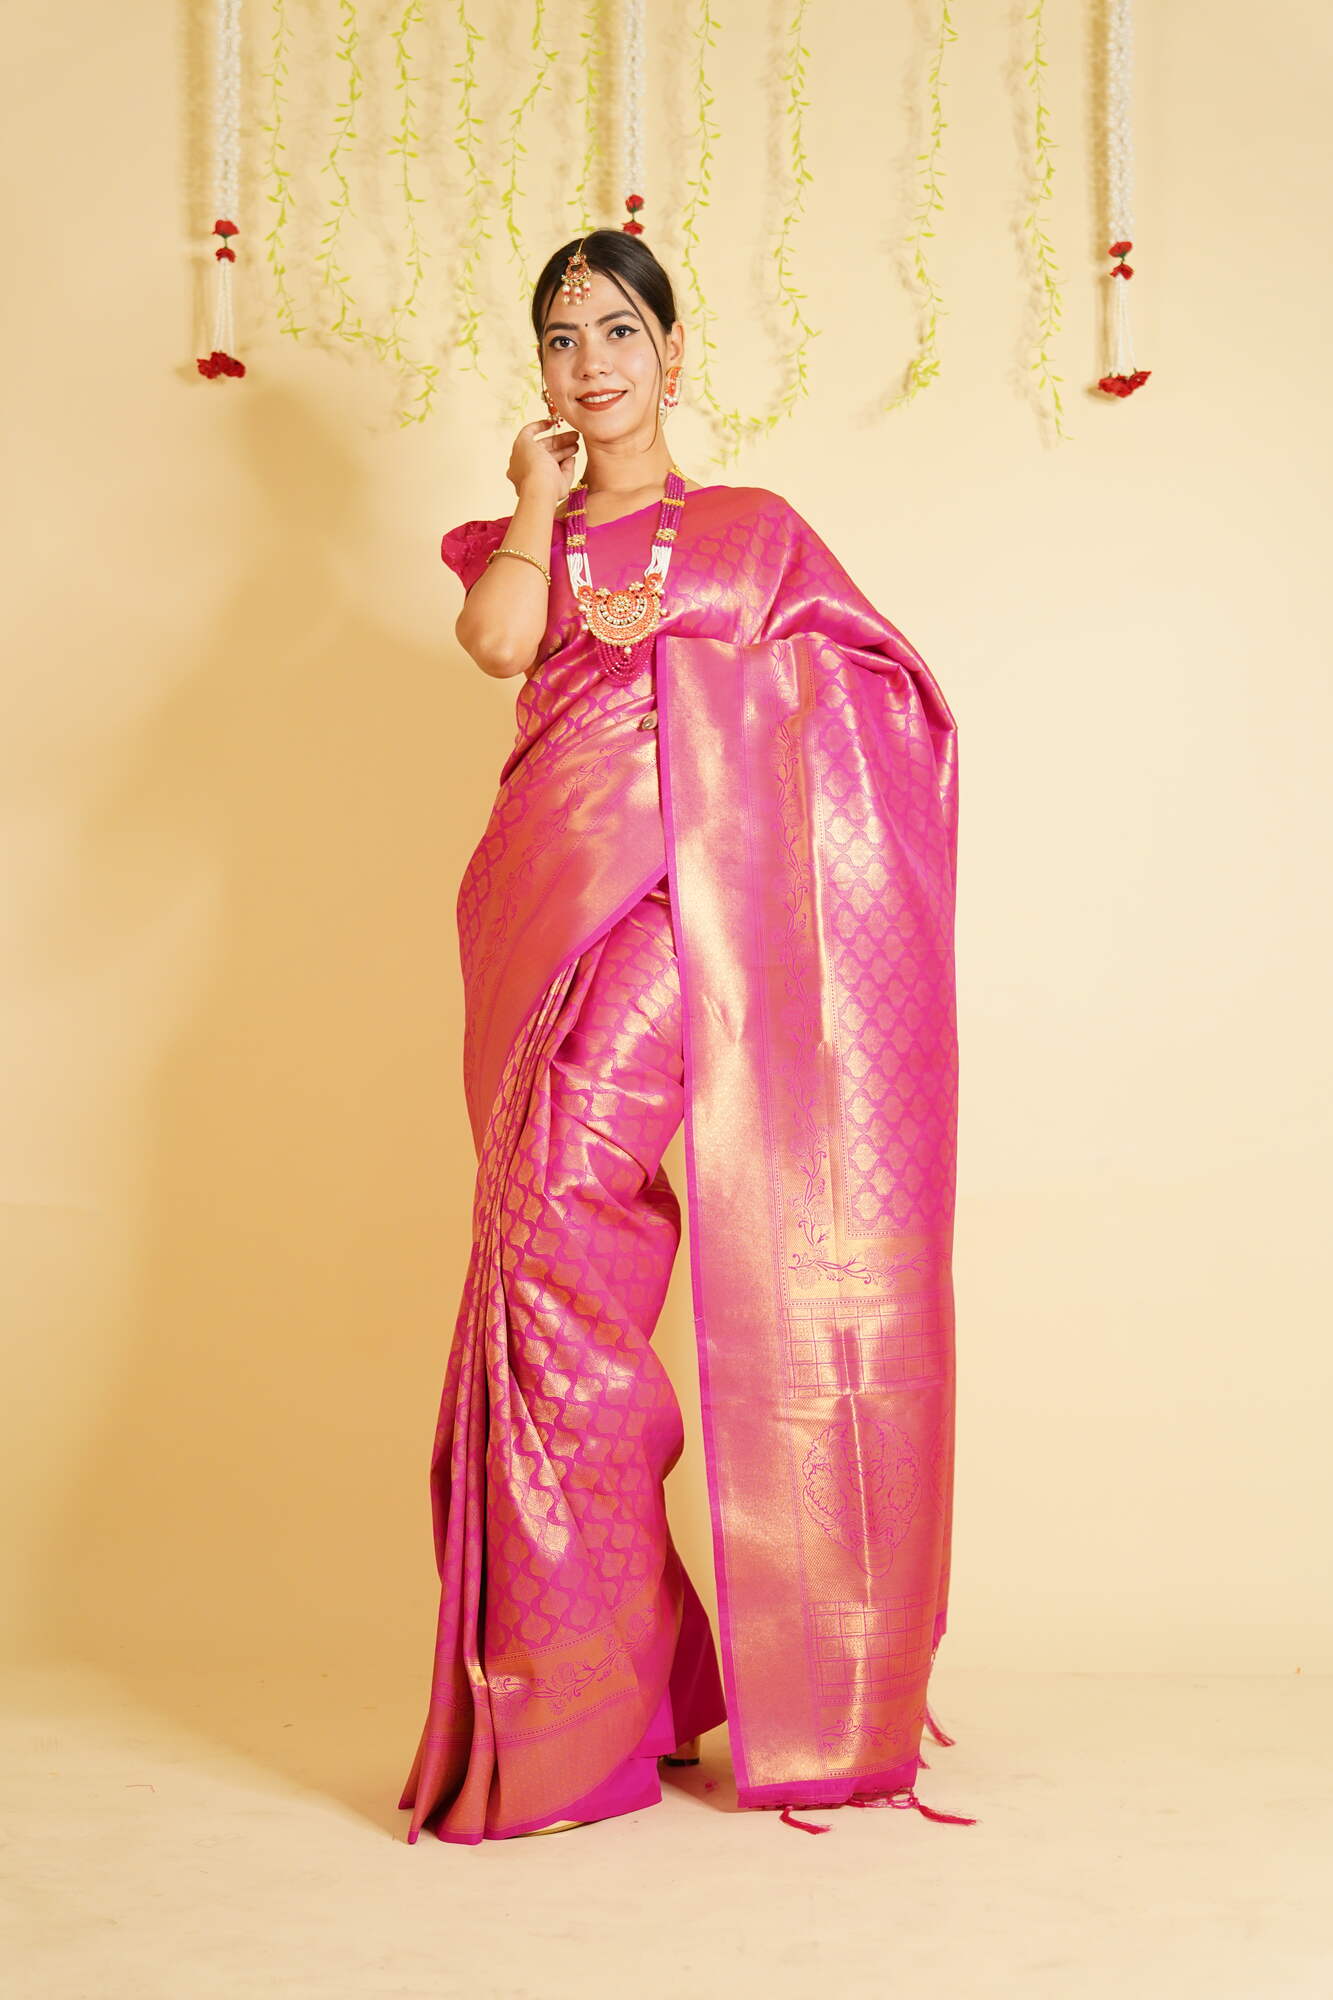 Ready to Wear Pink & Gold-Toned Woven Banarasi Saree Wrap in 1 minute saree With Readymade Blouse - Isadora Life Online Shopping Store